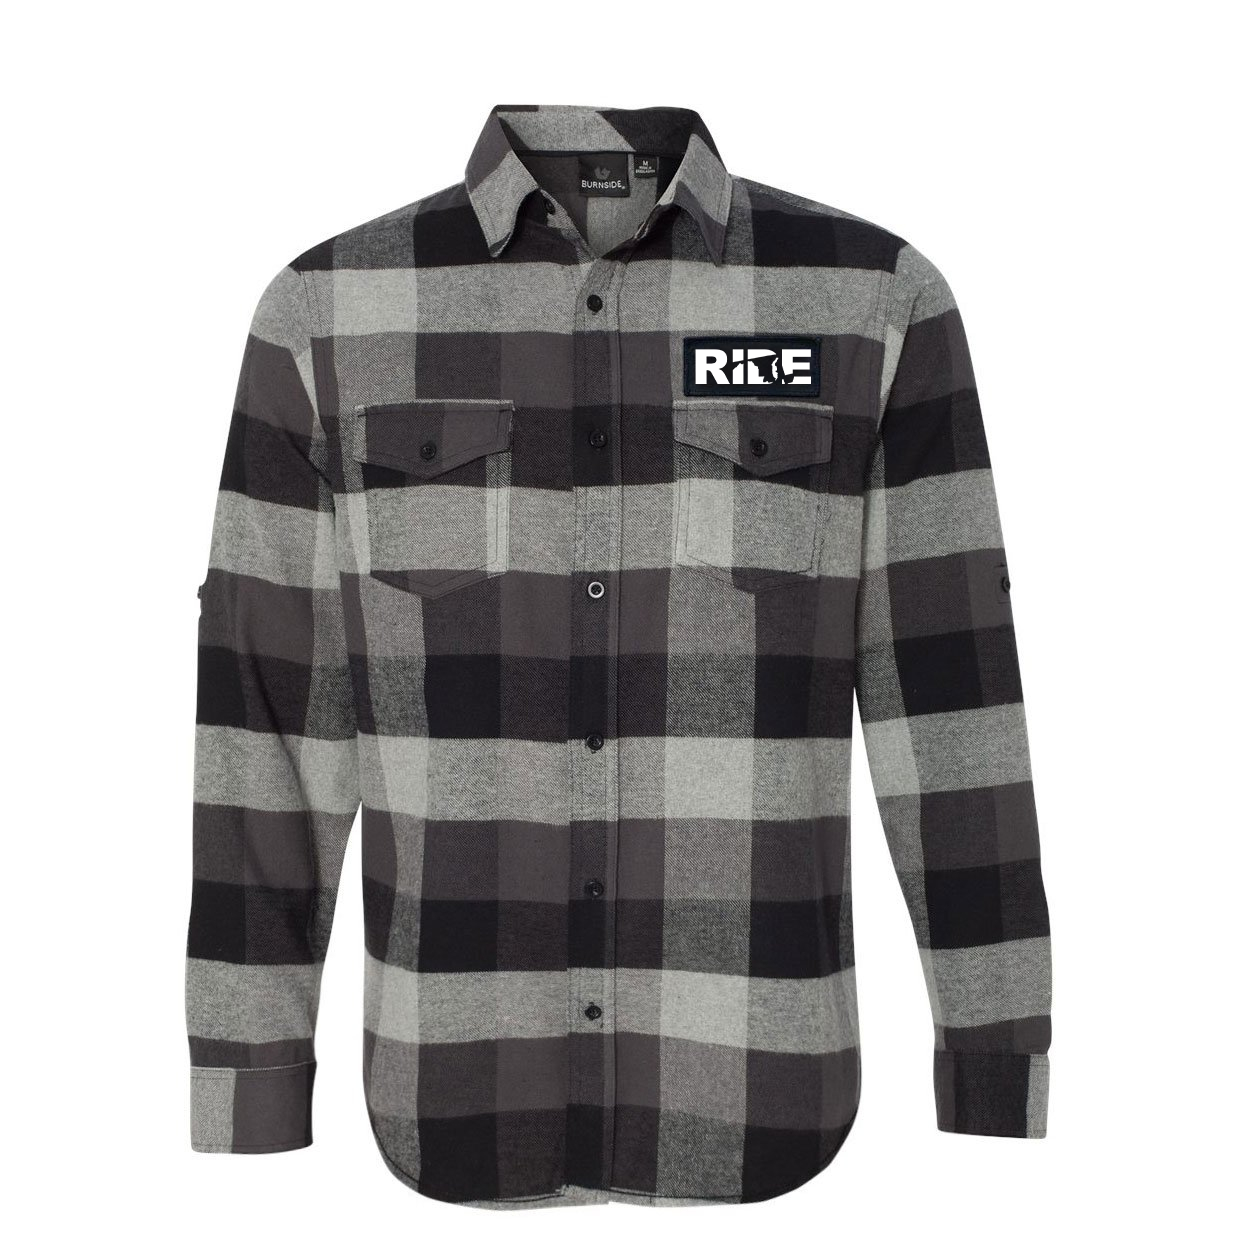 Ride Maryland Classic Unisex Long Sleeve Woven Patch Flannel Shirt Black/Gray (White Logo)